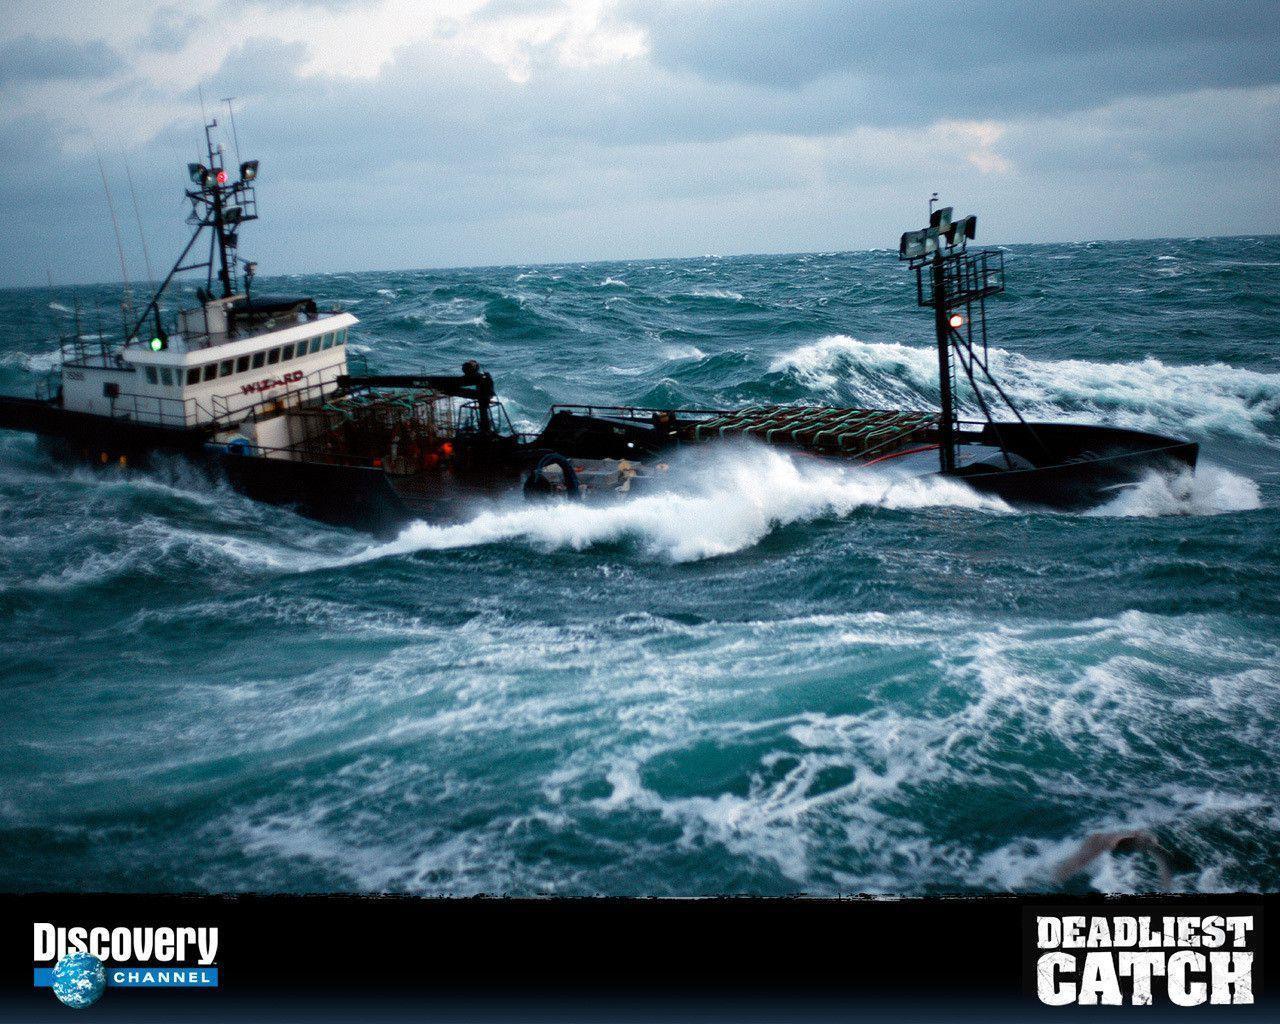 Deadliest Catch image Wizard HD wallpaper and background photo